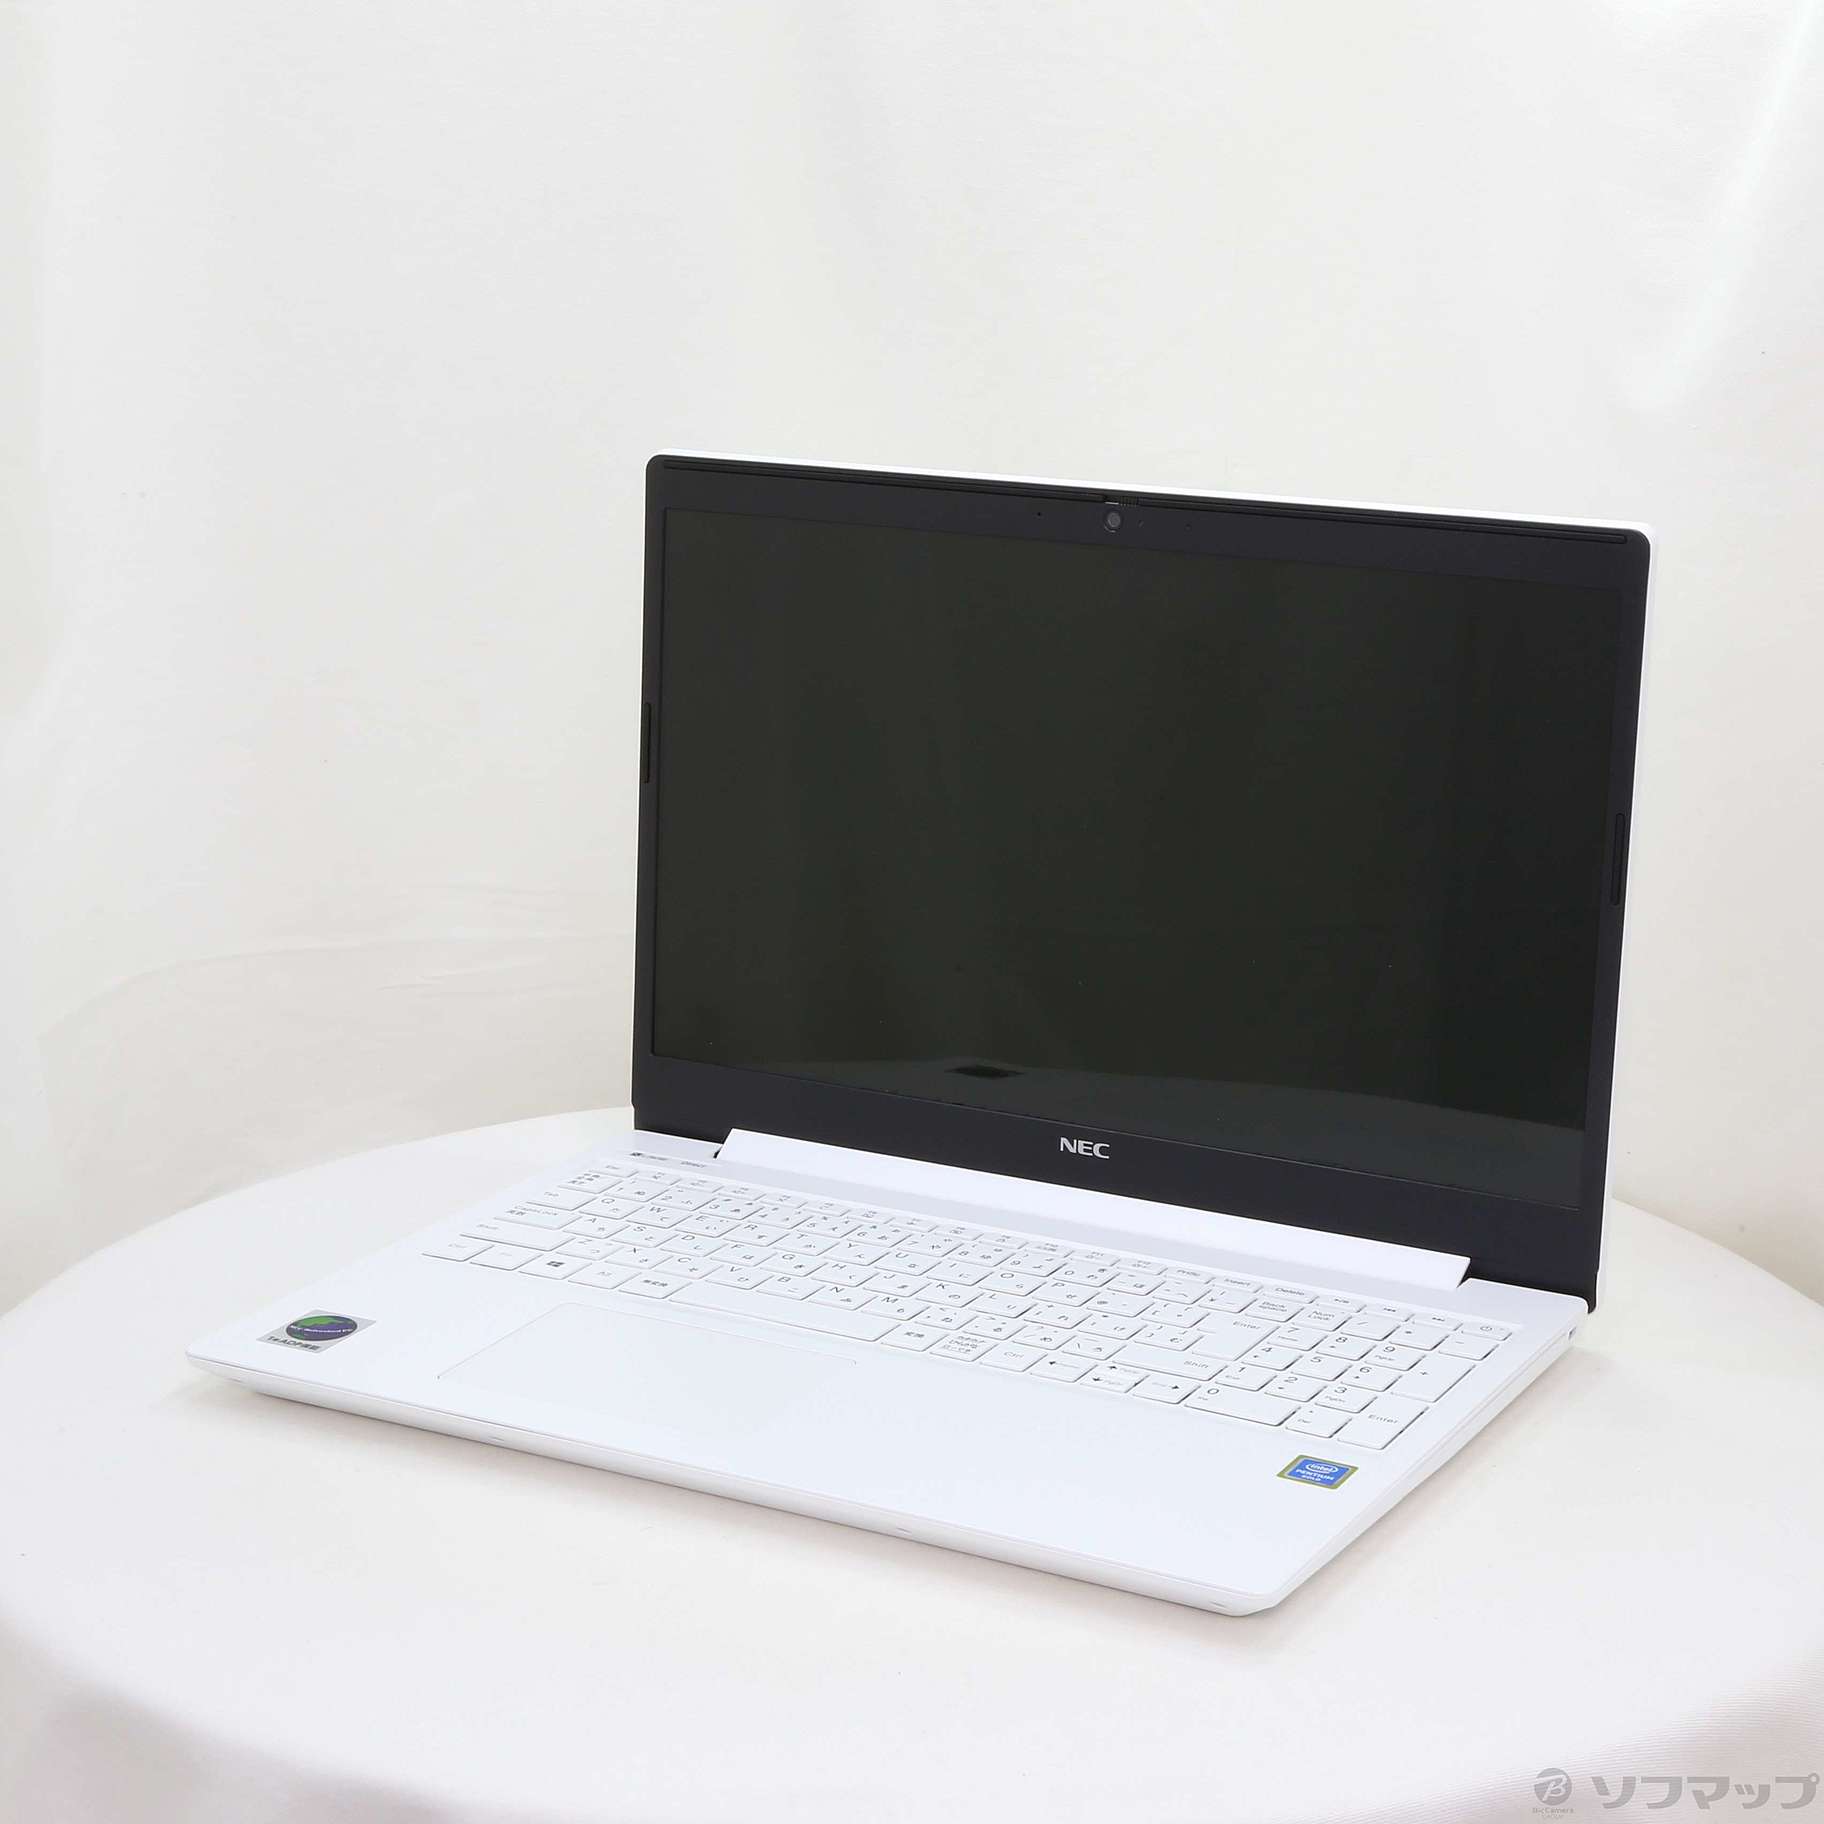 LAVIE Direct NS PC-GN23DRHAH 〔NEC Refreshed PC〕 〔Windows 10〕 ≪メーカー保証あり≫